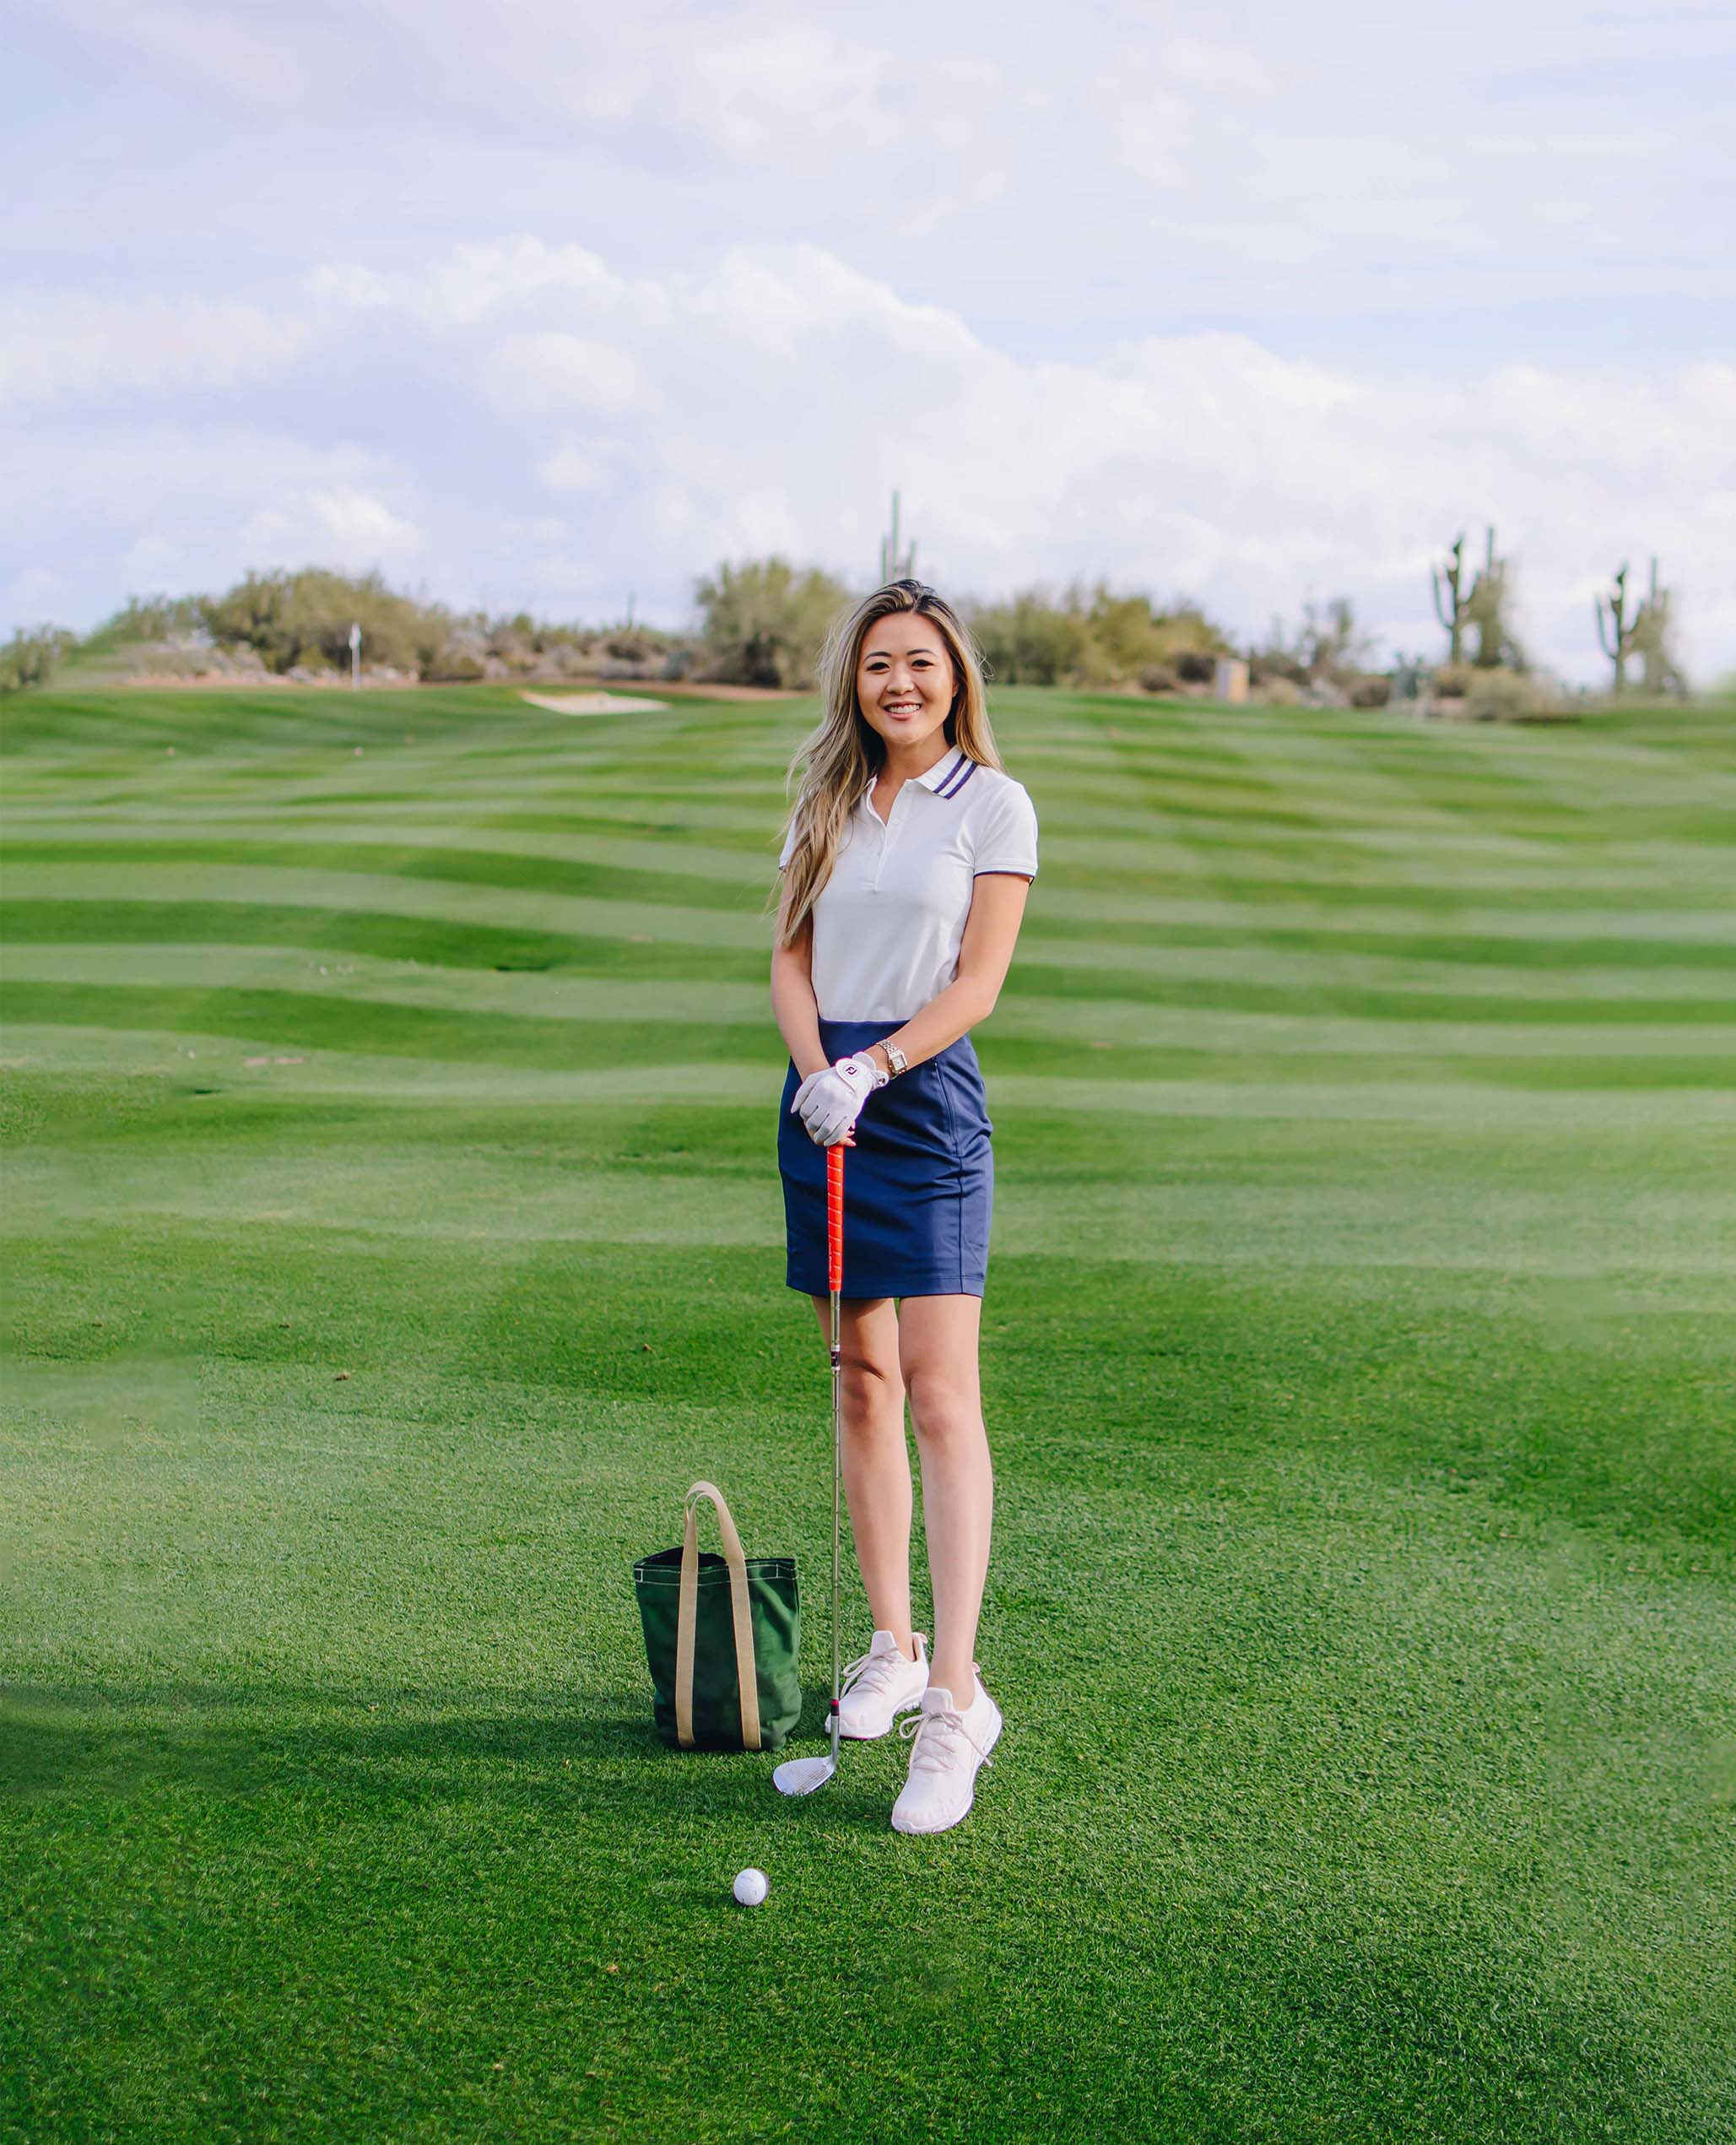 Golf Outfit for Female Golfers by Tory Burch and Tivvit App.